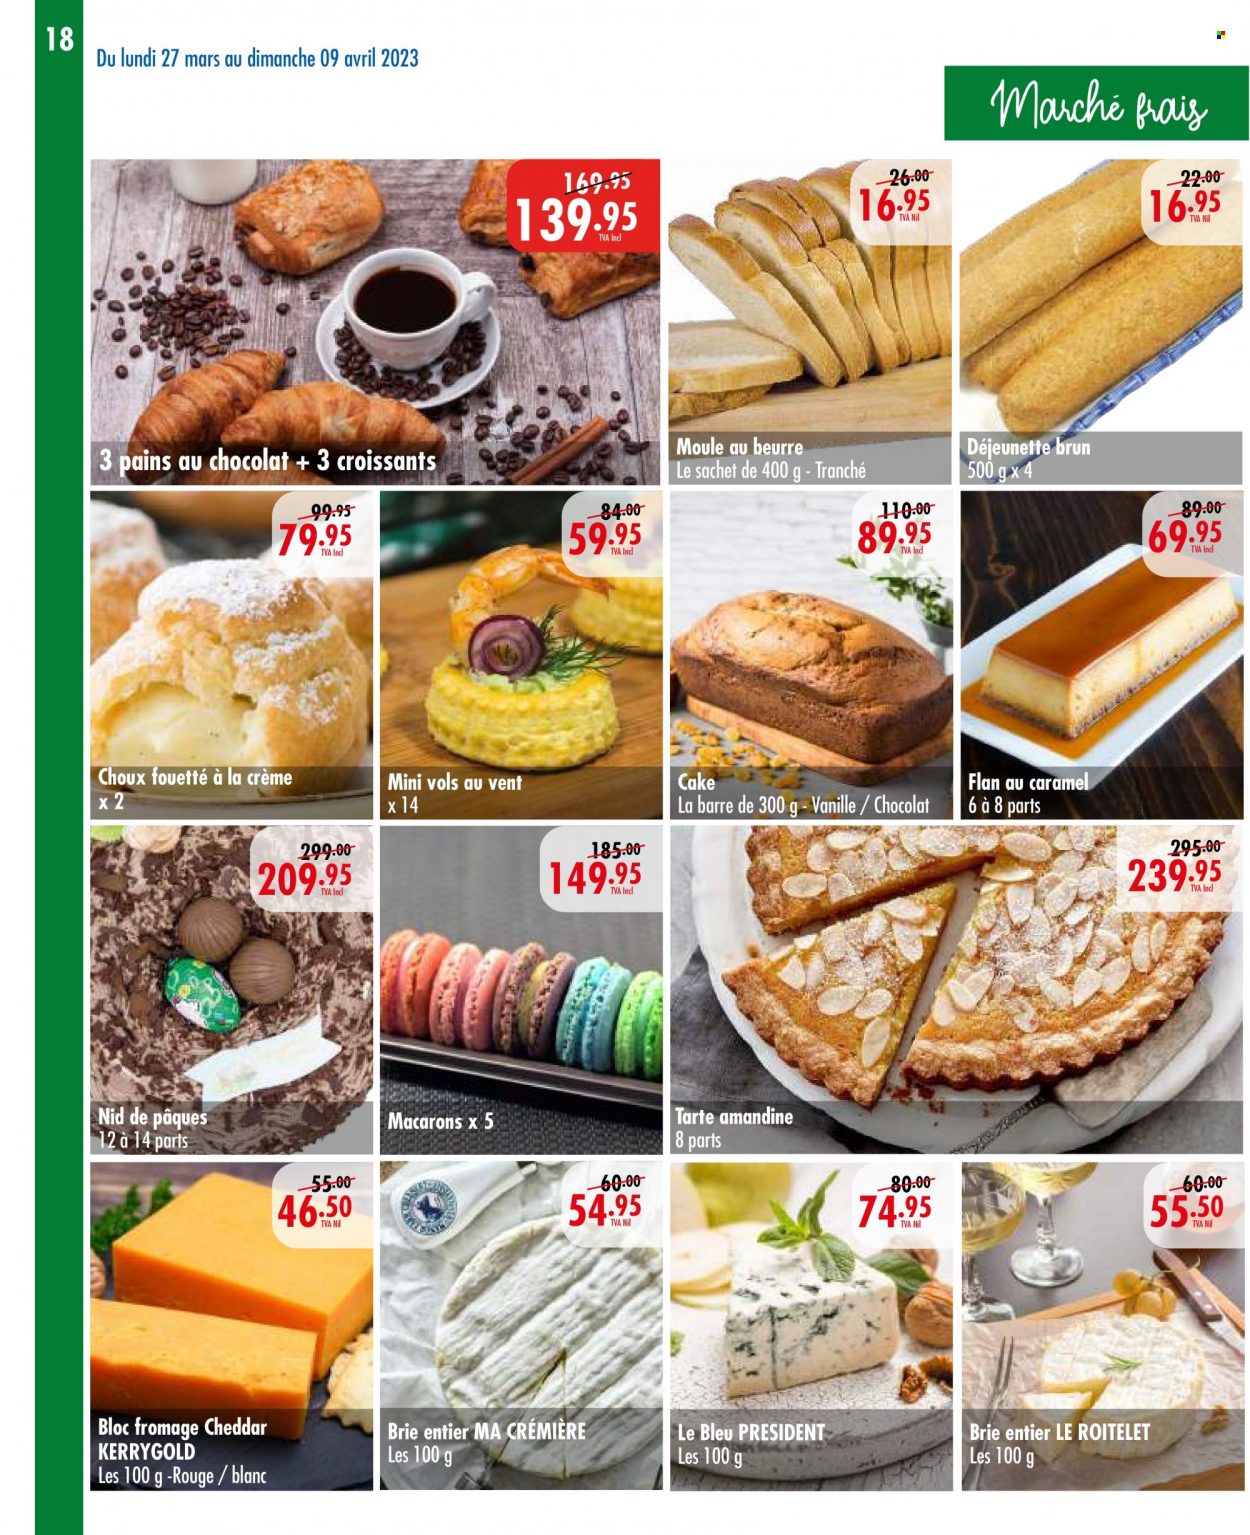 thumbnail - Jumbo Catalogue - 27.03.2023 - 9.04.2023 - Sales products - cake, croissant, macaroons, cheddar, cheese, brie, Président, Mars, caramel. Page 18.